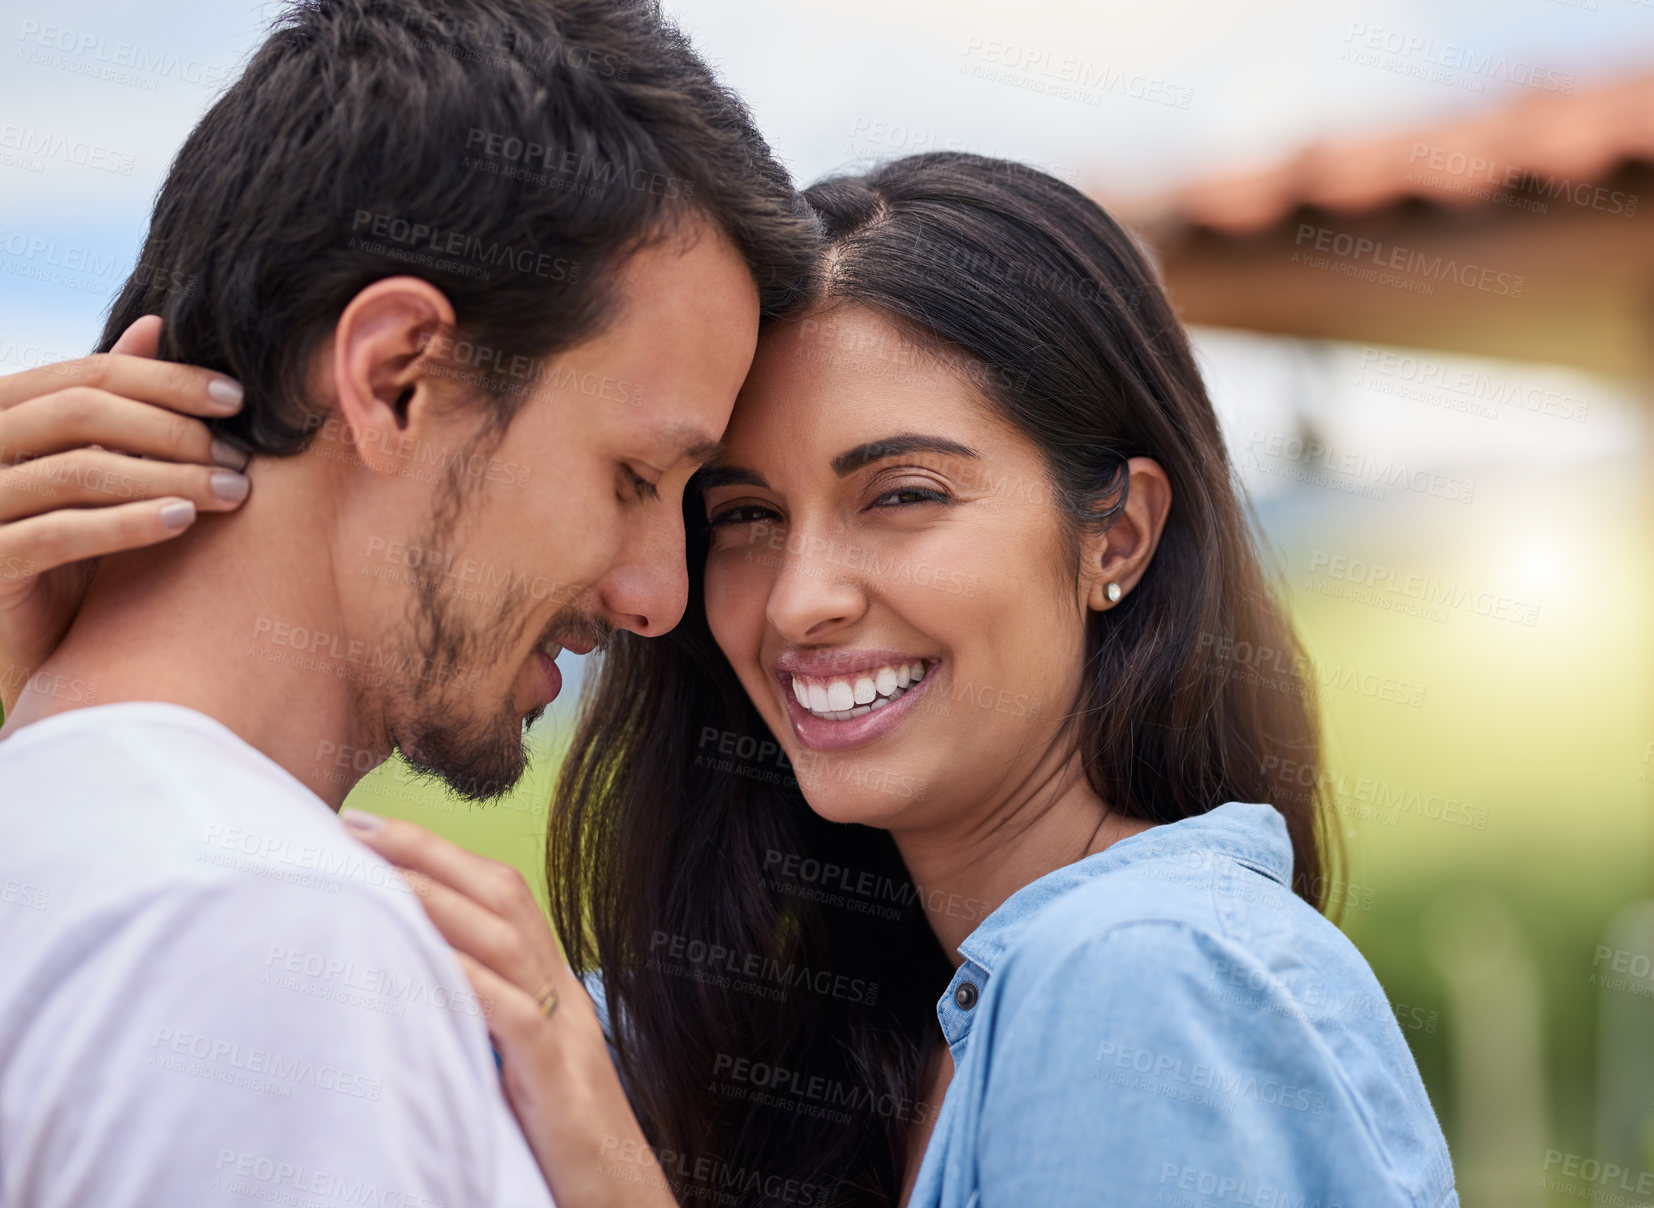 Buy stock photo Cropped shot of an affectionate young couple embracing while standing outdoors